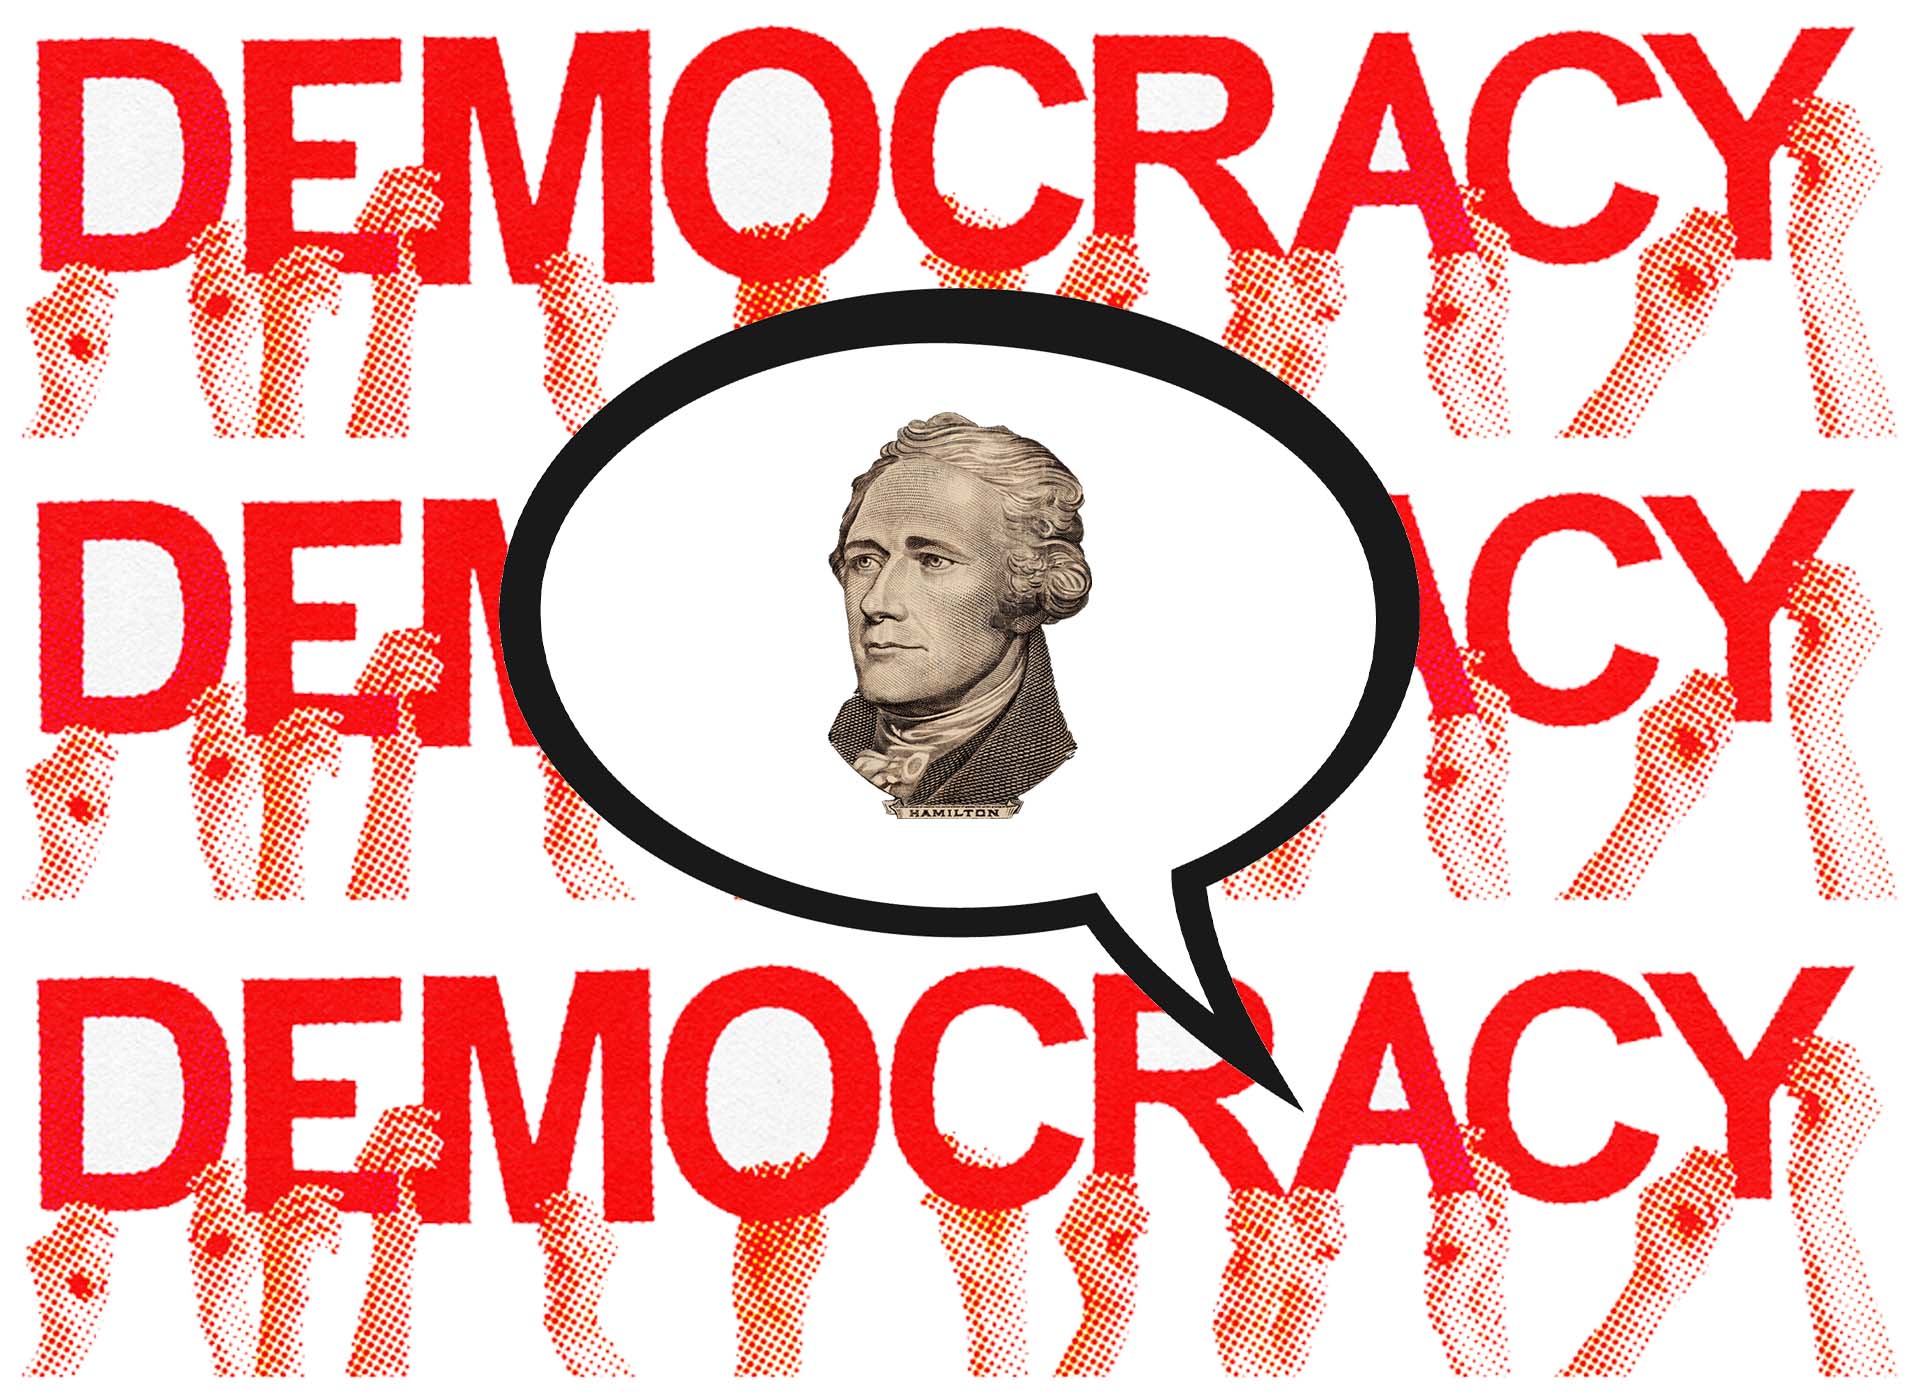 What We Talk About When We Talk About Democracy